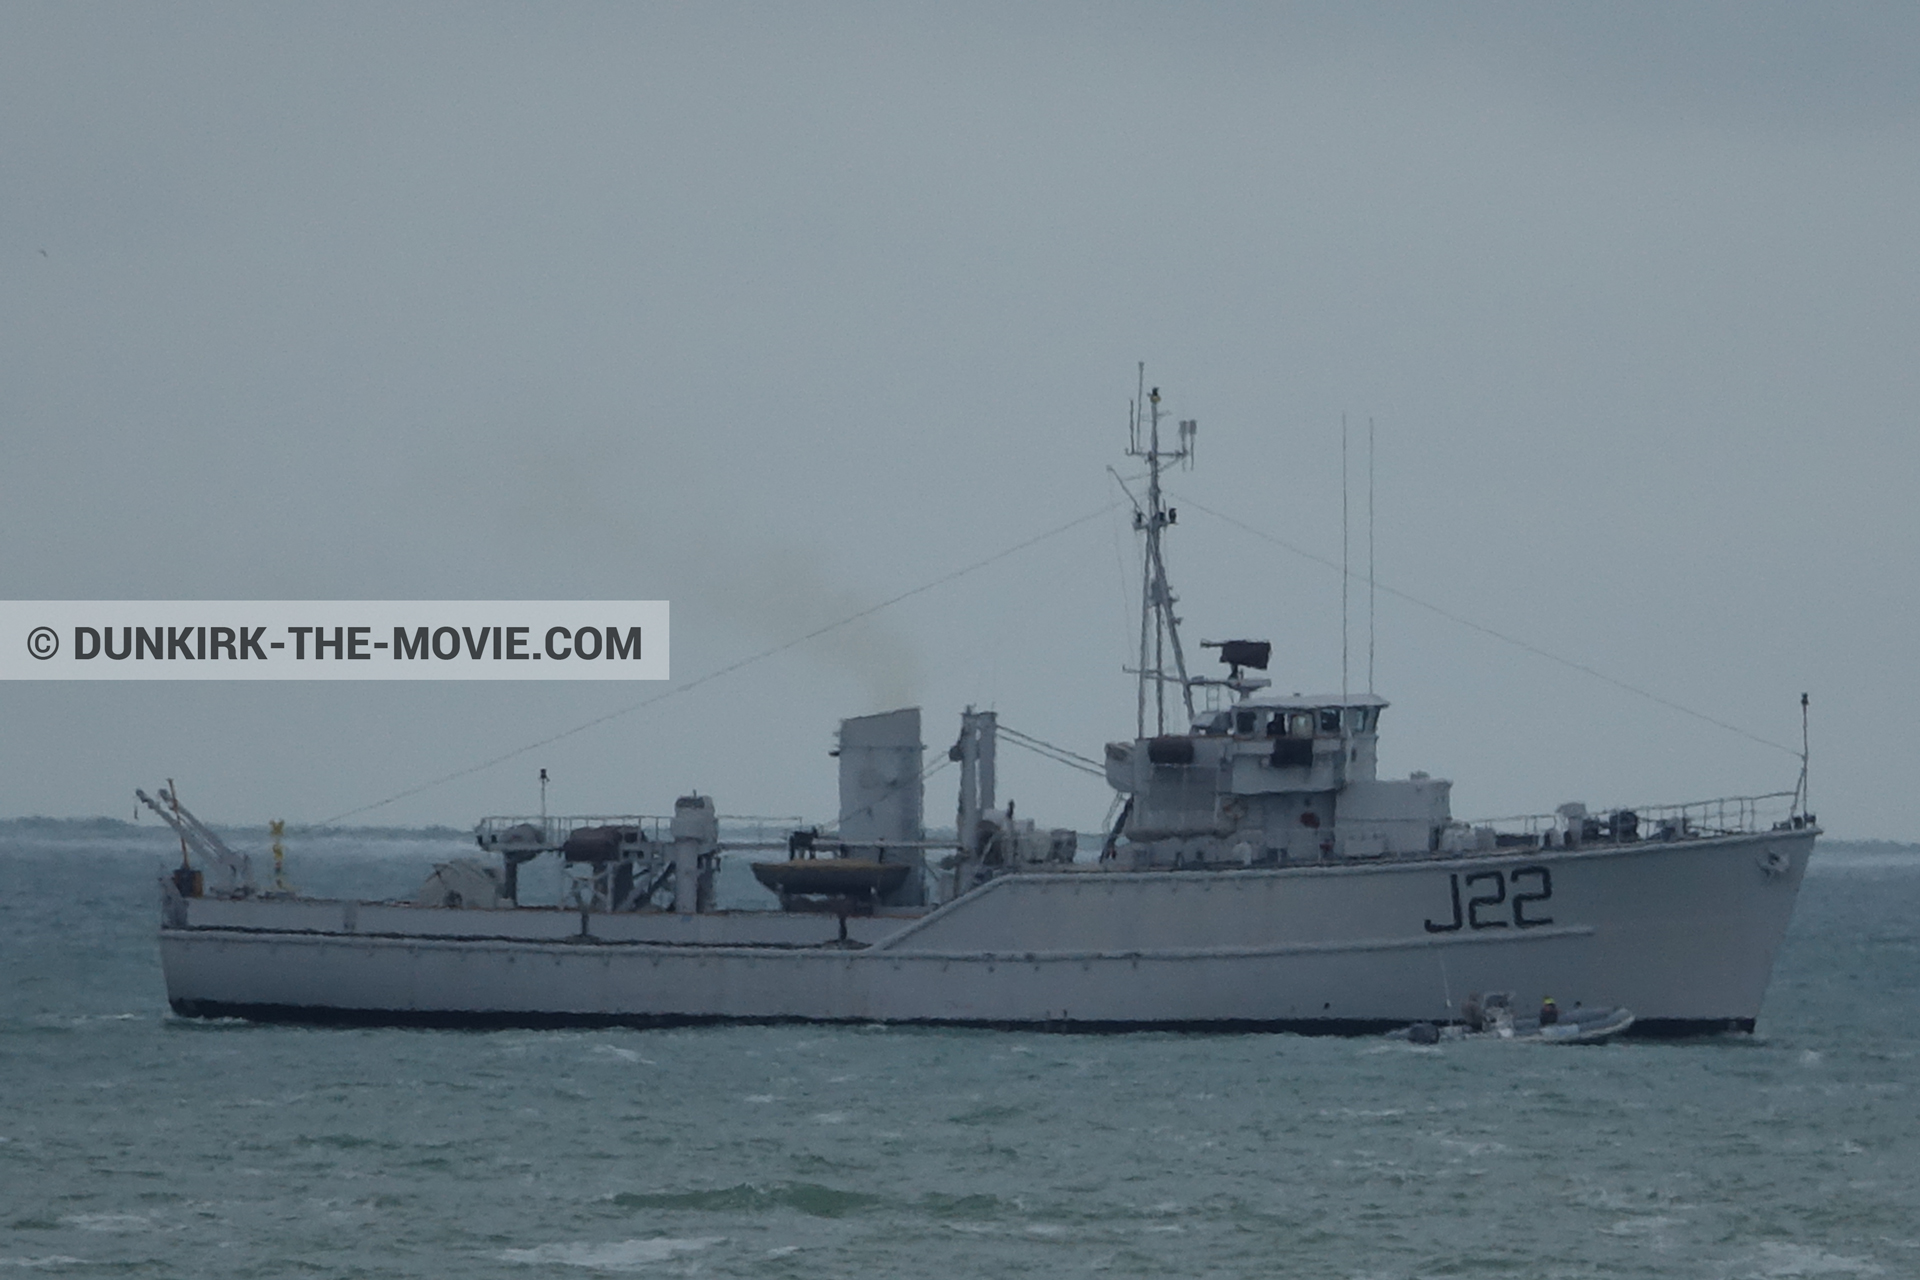 Picture with boat, grey sky, J22 -Hr.Ms. Naaldwijk, calm sea,  from behind the scene of the Dunkirk movie by Nolan